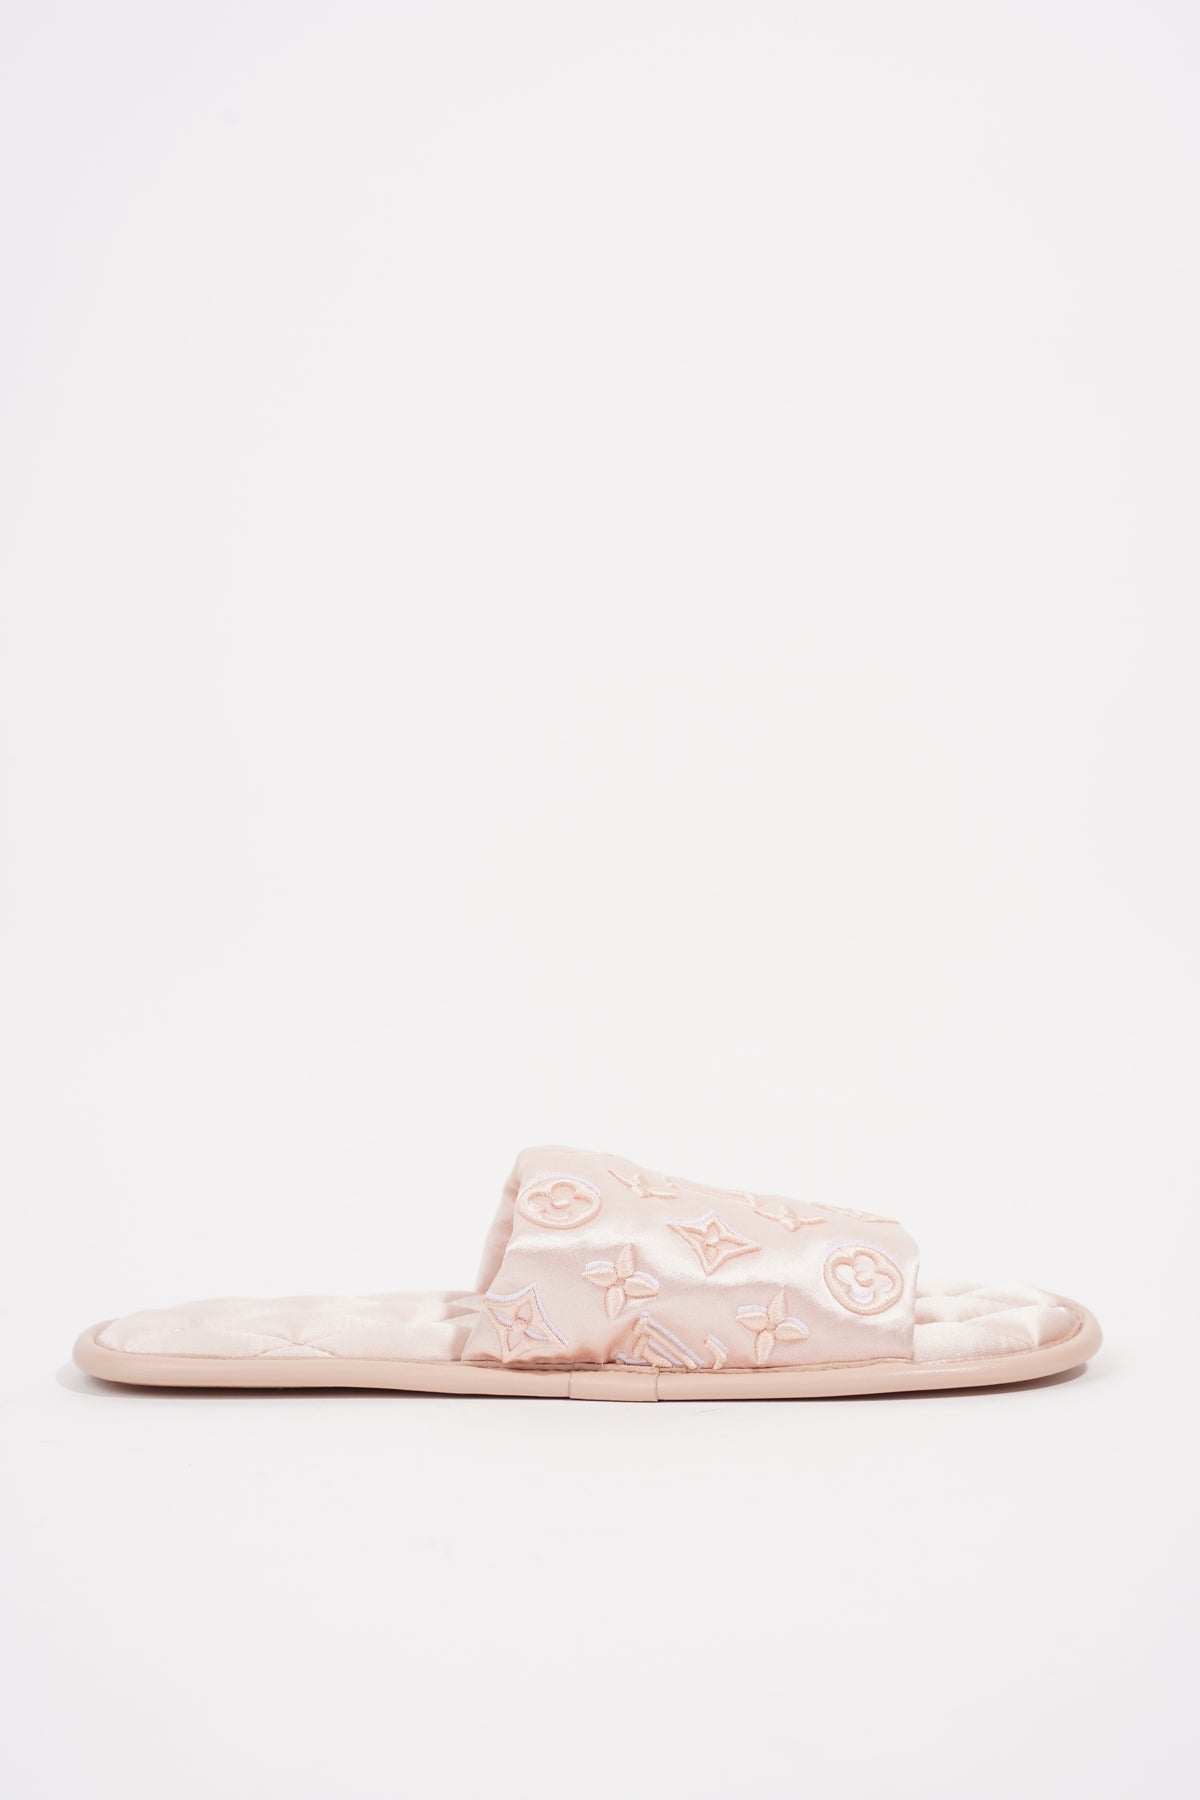 Homey Flat Mules, Pink - 10  Louis vuitton slippers, Flat mules